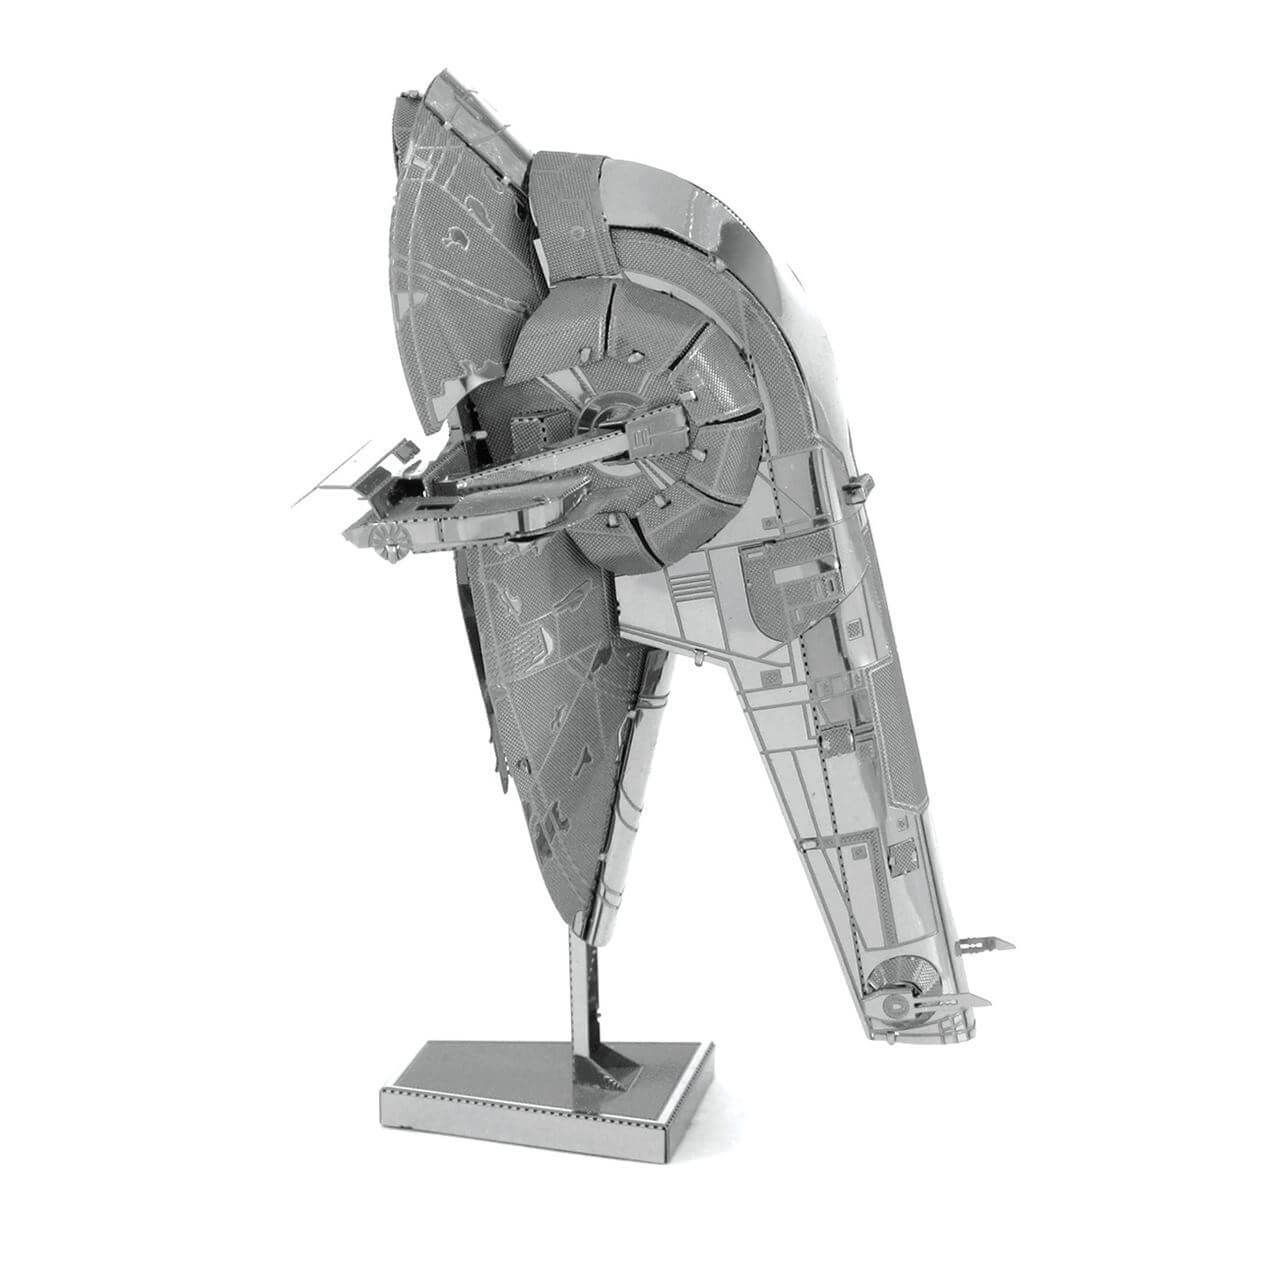 Side view of the model kit.